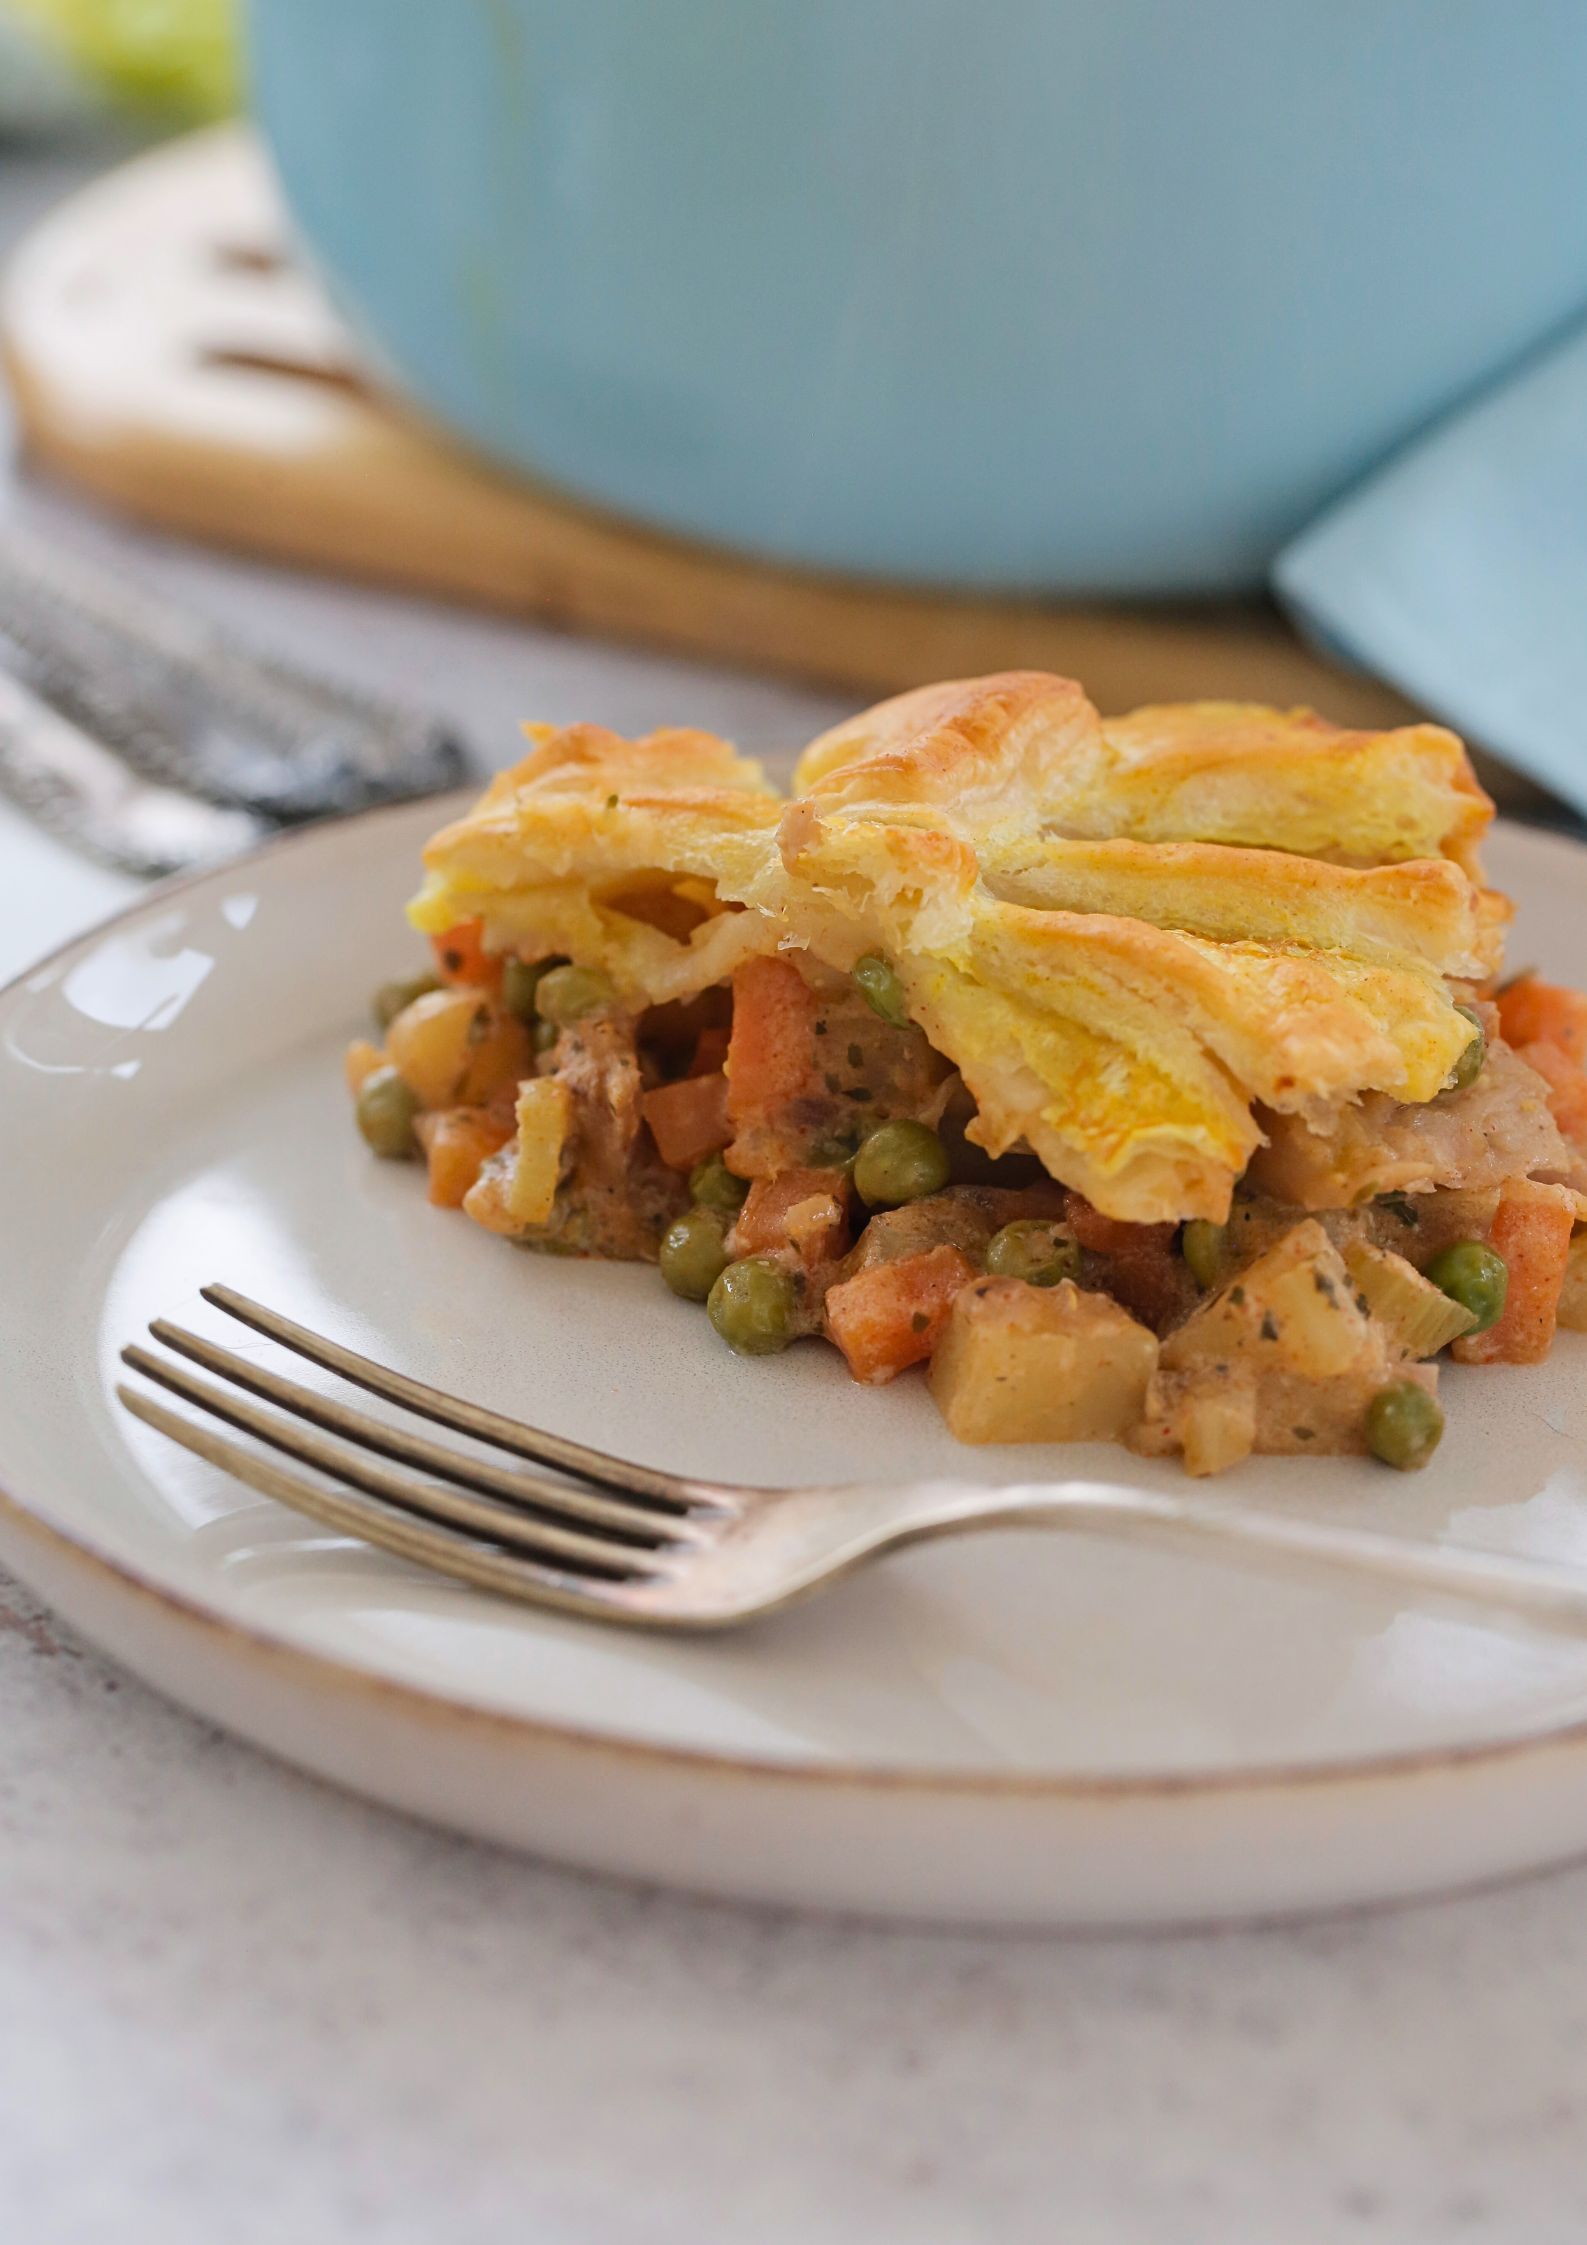 A comfort food classic made vegan! This chicken pot pie packed with veggies and topped with flaky pastry is an easy one pan meal that's absolutely full of flavour. It's also perfect for making ahead and a real family favourite! Recipe on thecookandhim.com | #veganpotpie #meatfree #veganchicken #easyveganmeal #onepanmeal #vegandinner